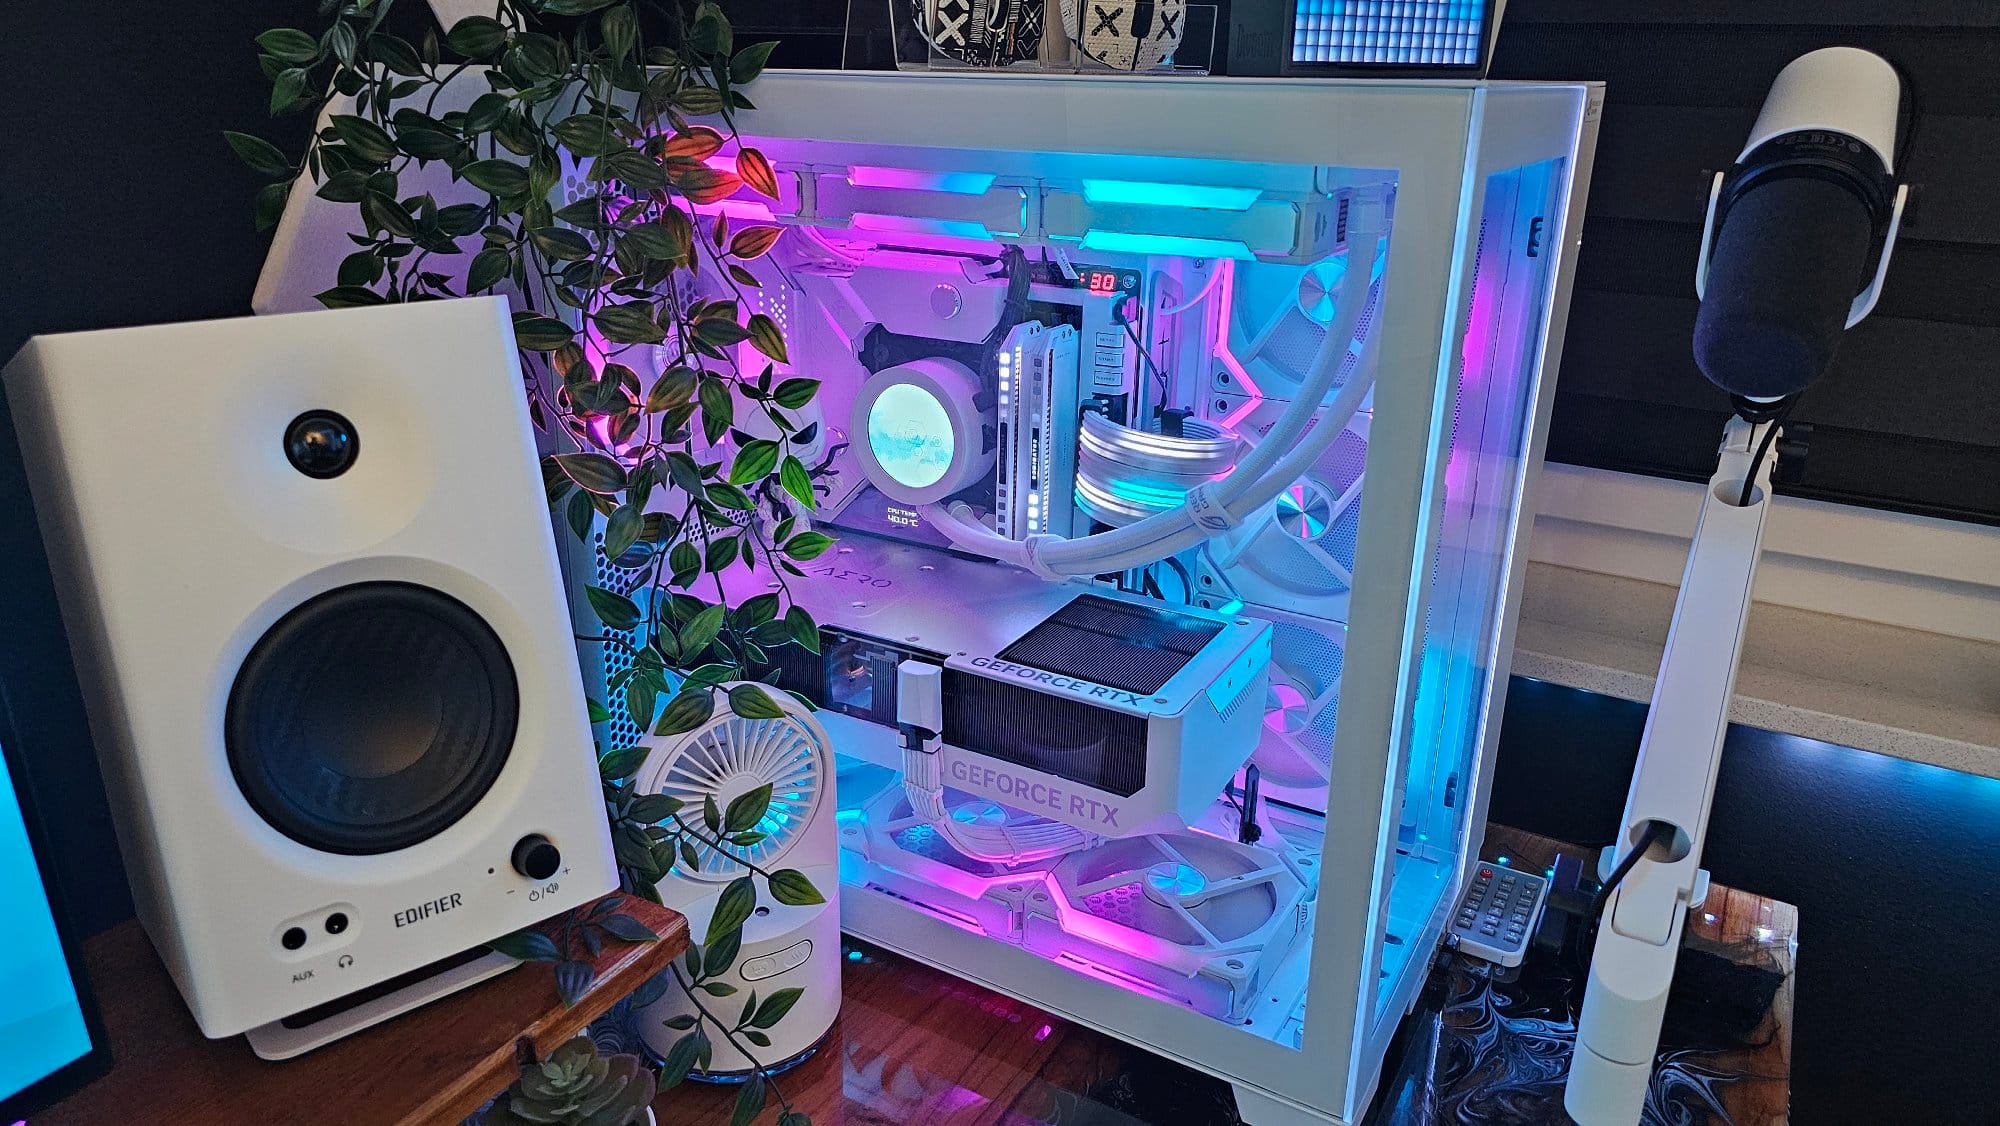 A close-up of a high-end custom PC with RGB lighting, situated next to a speaker and a microphone on a boom arm, with a potted plant adding a touch of greenery to the modern tech setup